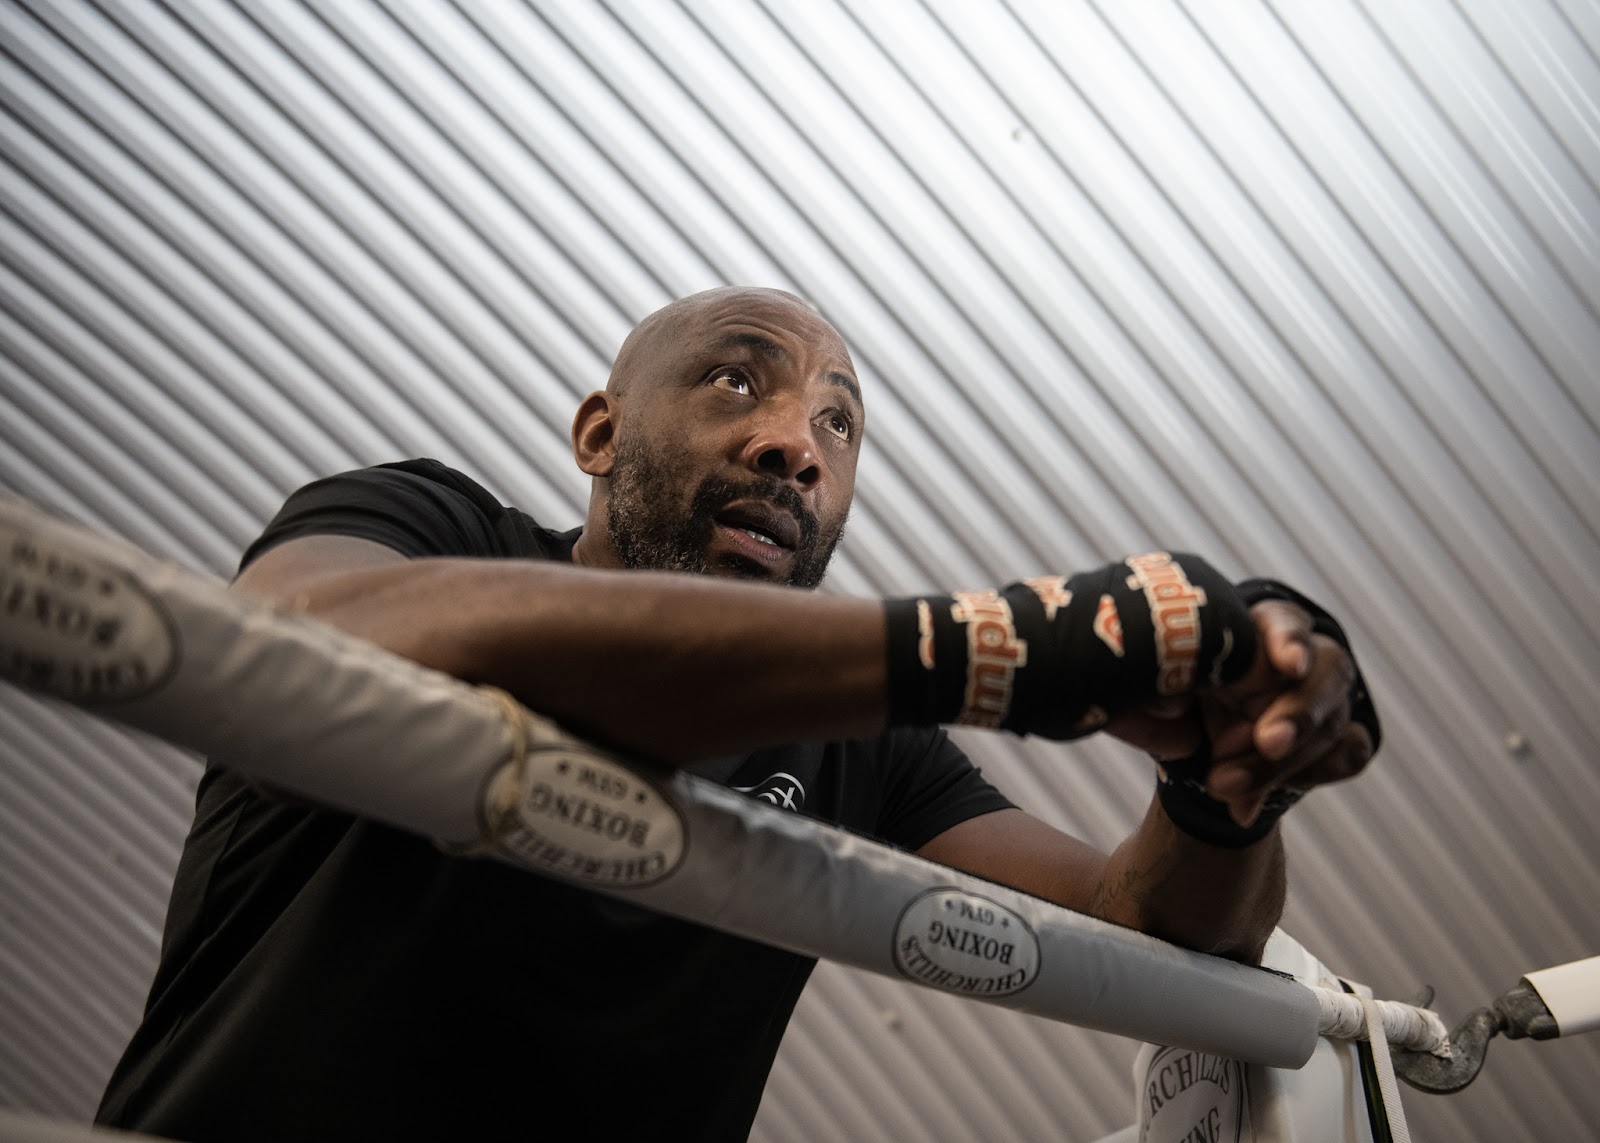 Johnny Nelson joins Ricky Hatton as a team leader for The Box Off